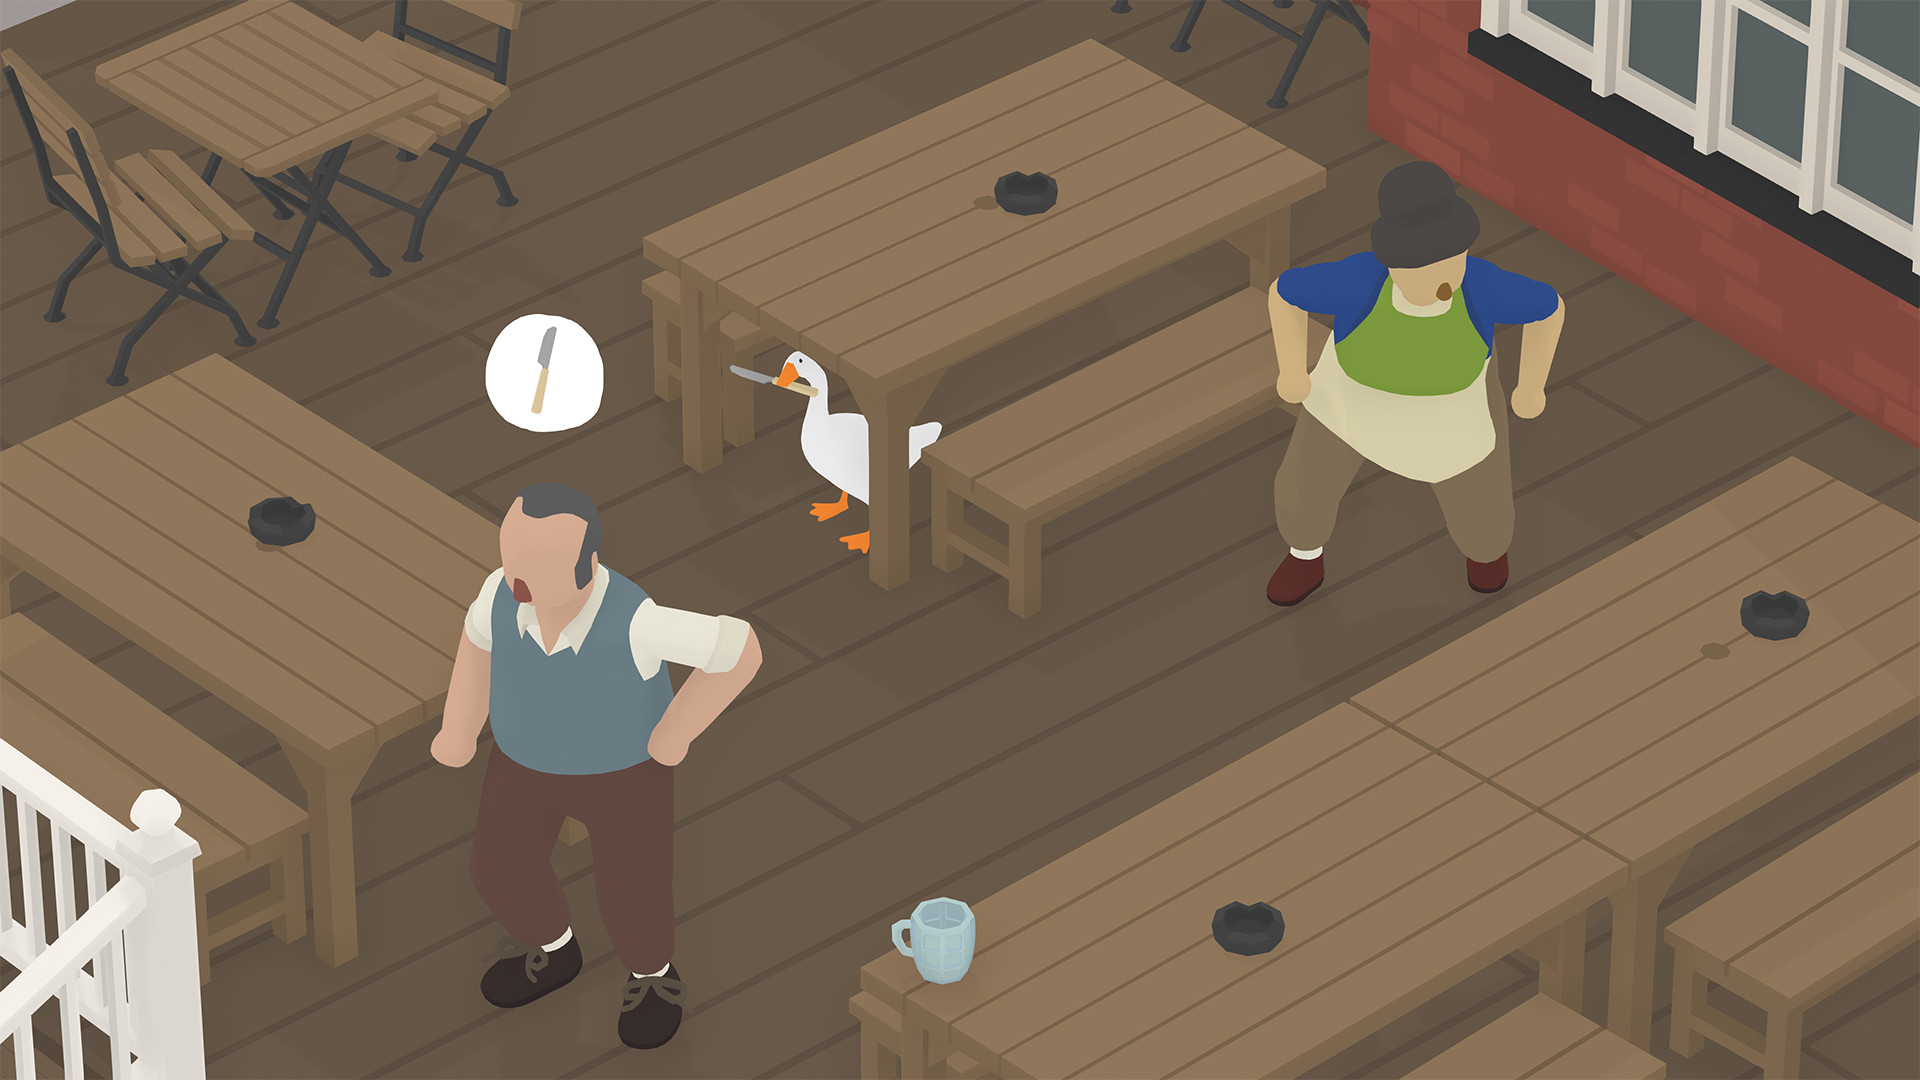 GOOSE GAME - Play Online for Free!